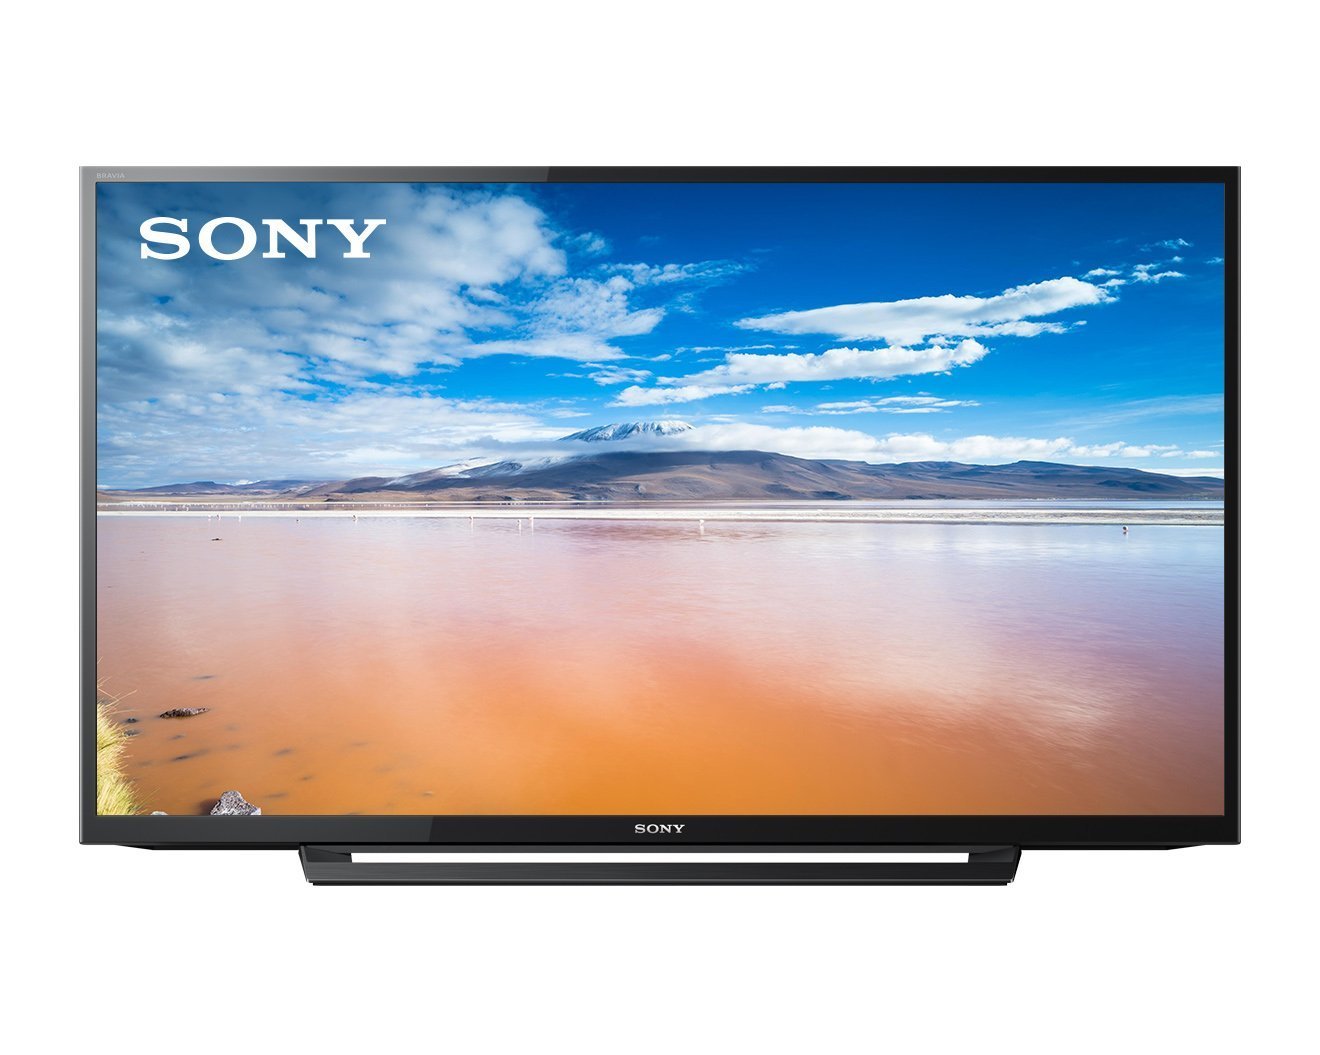 Sony 40-Inch 1080p LED TV – Just $149.99! Amazon Cyber Monday!